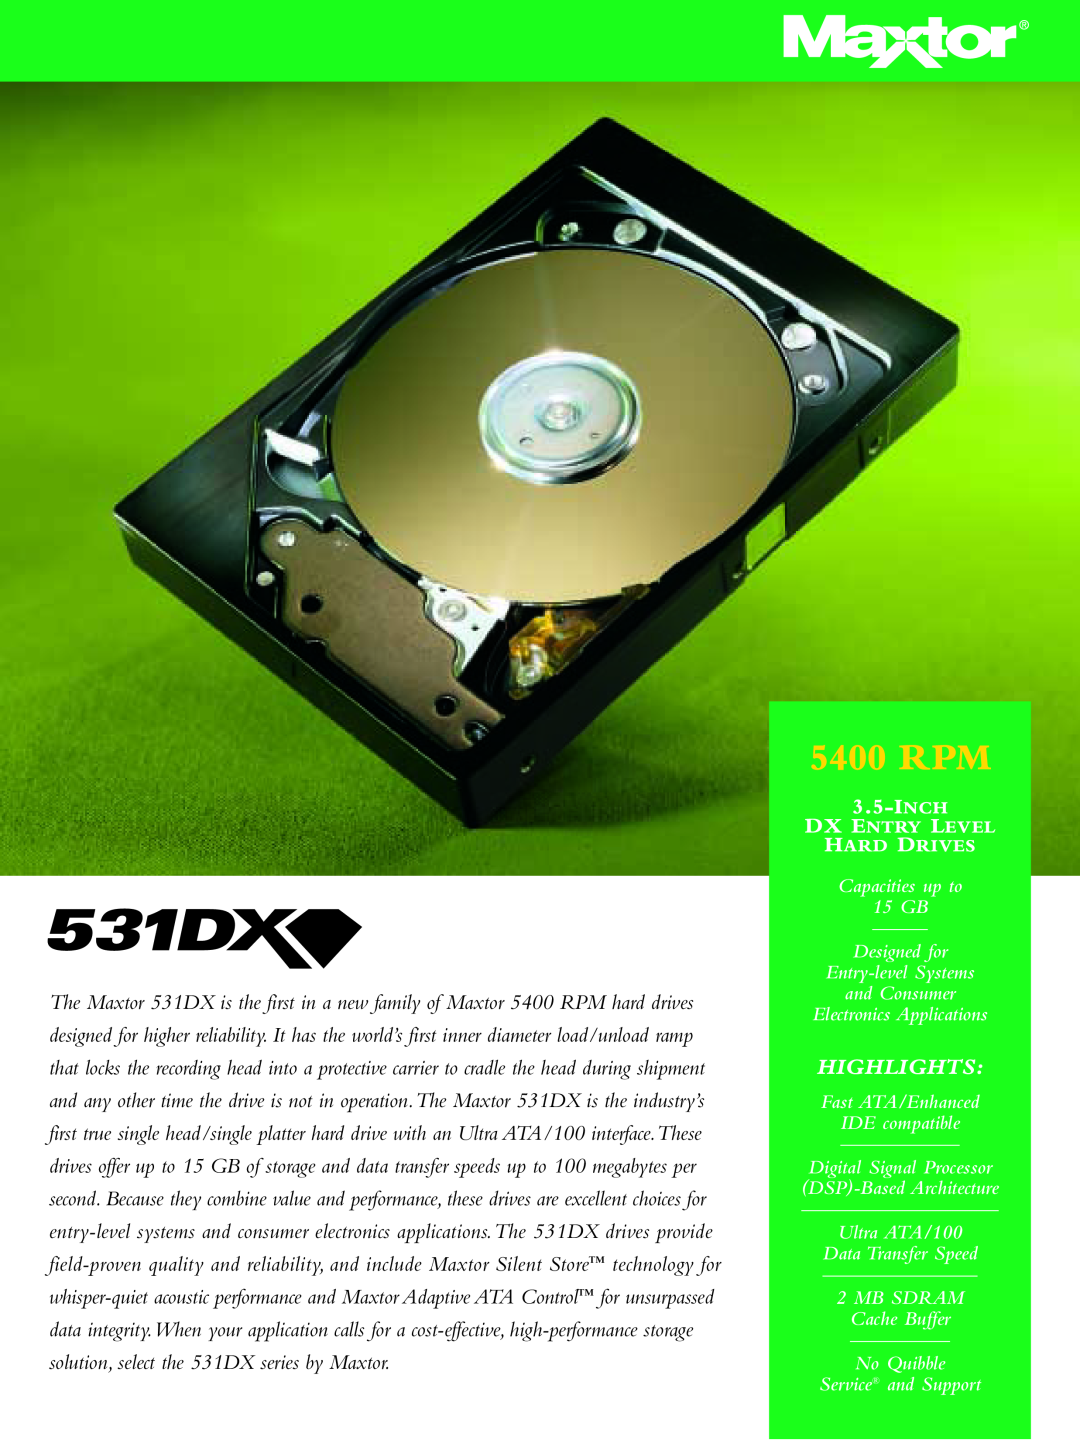 Maxtor 531DX manual 5400 RPM, Highlights, Inch, Capacities up to 15 GB Designed for Entry-level Systems and Consumer 